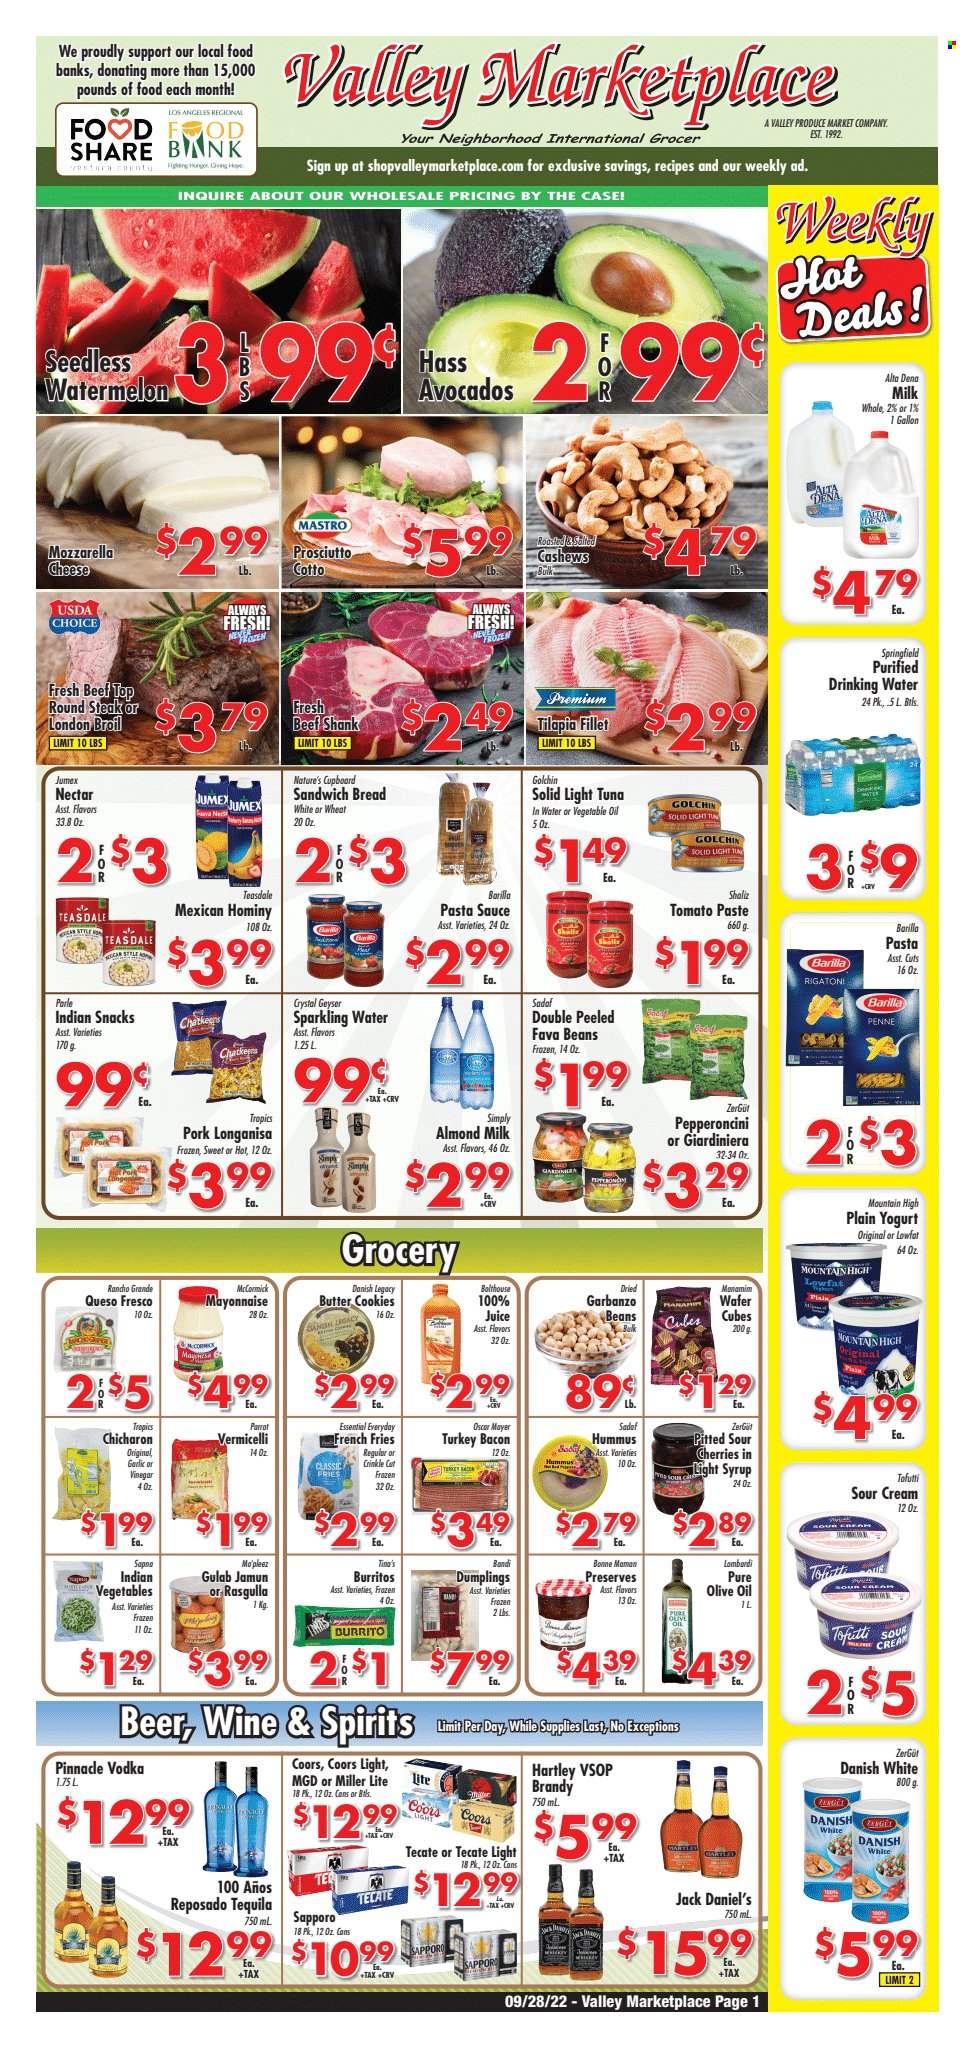 thumbnail - Valley Marketplace Flyer - 09/28/2022 - 10/04/2022 - Sales products - bread, beans, fava beans, garlic, avocado, watermelon, cherries, tilapia, tuna, Jack Daniel's, pasta sauce, sauce, dumplings, Barilla, burrito, bacon, turkey bacon, prosciutto, Oscar Mayer, hummus, mozzarella, queso fresco, cheese, yoghurt, almond milk, milk, sour cream, mayonnaise, potato fries, french fries, cookies, wafers, butter cookies, snack, Parle, tomato paste, tuna in water, light tuna, penne, vinegar, olive oil, oil, syrup, cashews, juice, sparkling water, brandy, tequila, vodka, beer, beef meat, beef shank, steak, round steak, Miller Lite, Coors. Page 1.